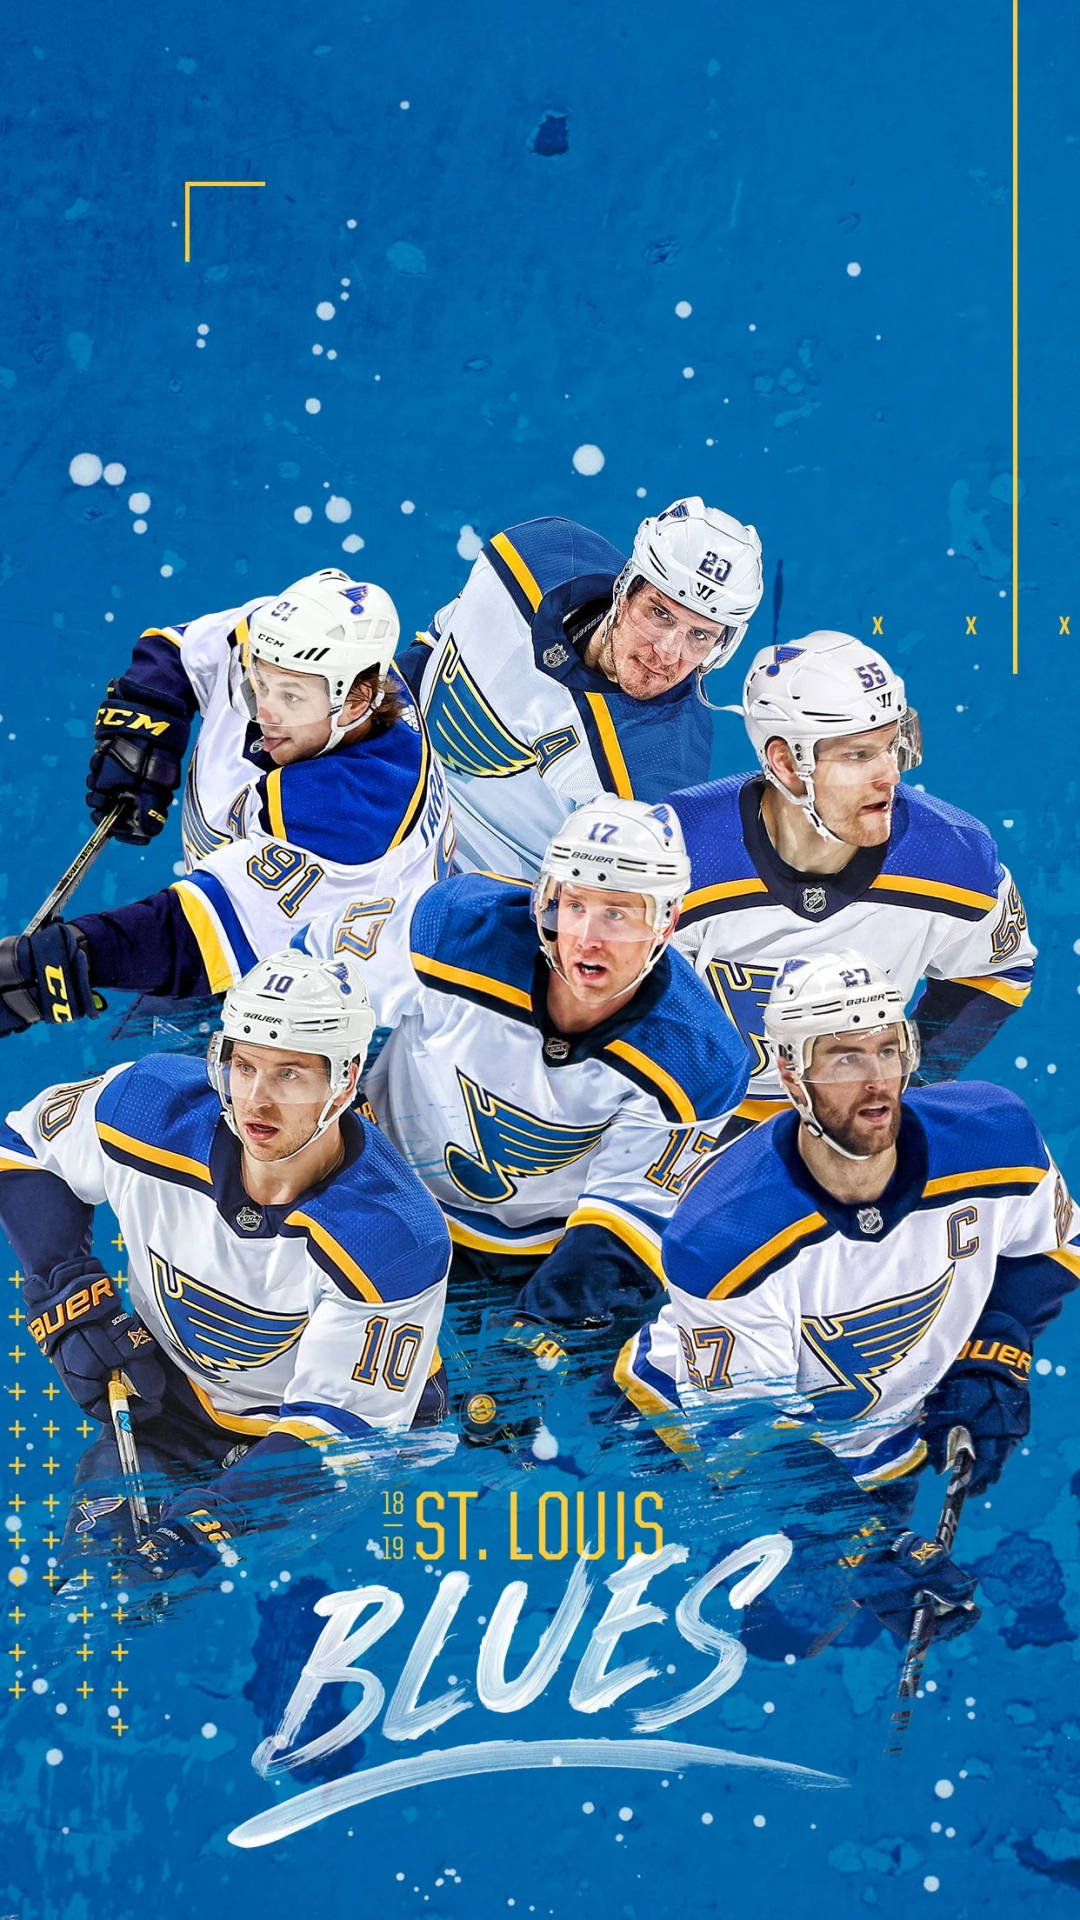 St. Louis Blues Hockey Team In Action Background